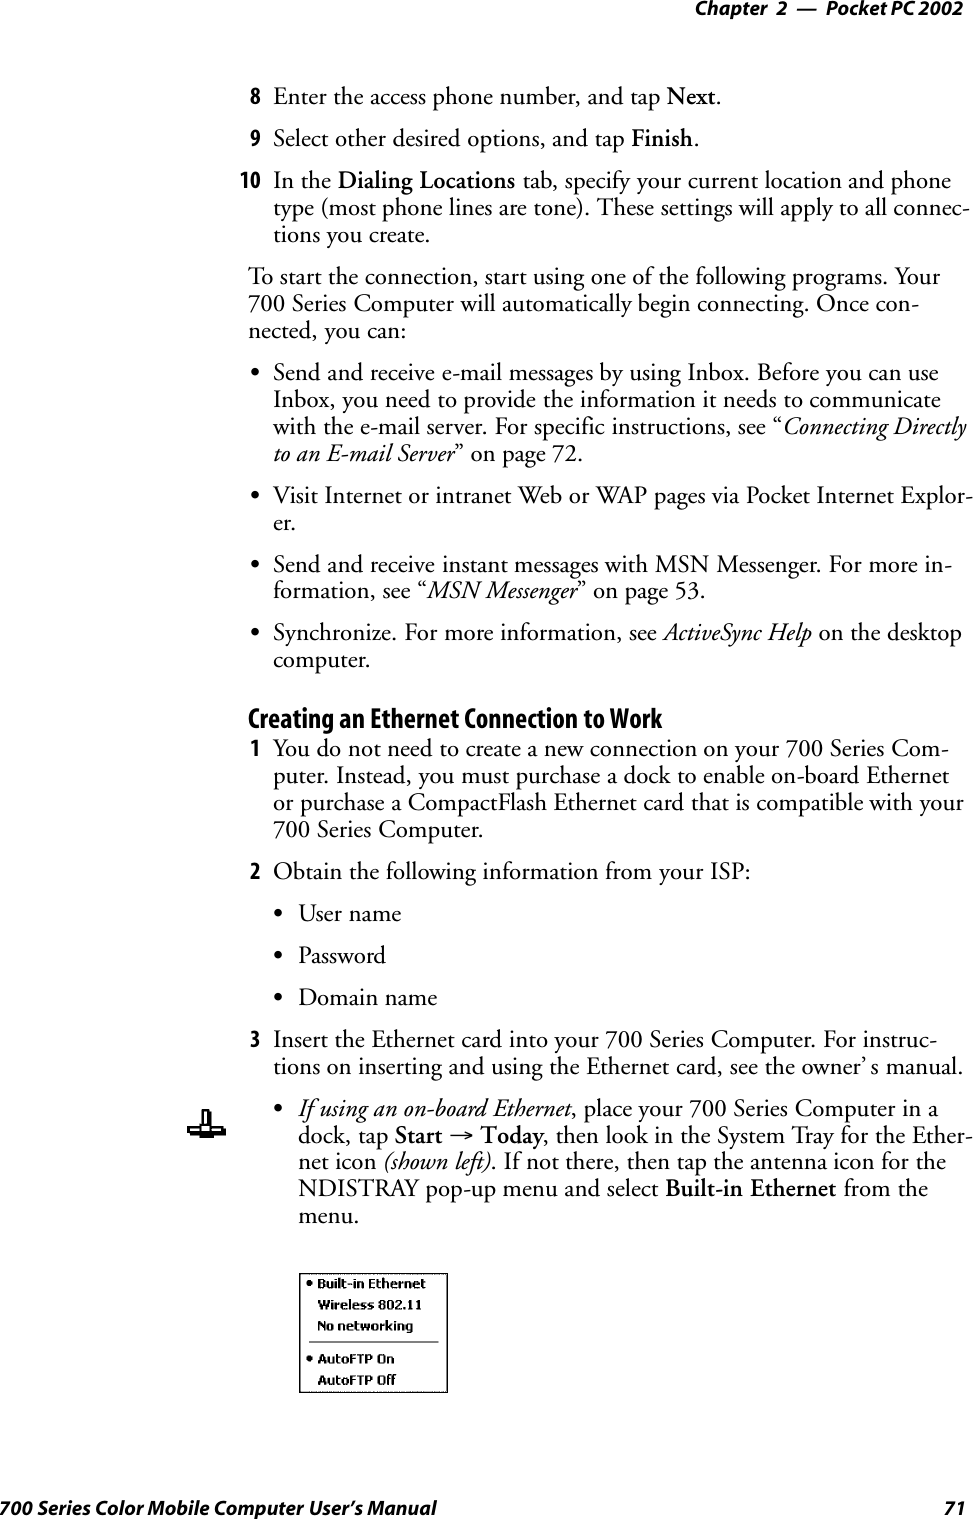 Pocket PC 2002—Chapter 271700 Series Color Mobile Computer User’s Manual8Enter the access phone number, and tap Next.9Select other desired options, and tap Finish.10 In the Dialing Locations tab, specify your current location and phonetype (most phone lines are tone). These settings will apply to all connec-tions you create.To start the connection, start using one of the following programs. Your700 Series Computer will automatically begin connecting. Once con-nected, you can:SSend and receive e-mail messages by using Inbox. Before you can useInbox, you need to provide the information it needs to communicatewith the e-mail server. For specific instructions, see “Connecting Directlyto an E-mail Server” on page 72.SVisit Internet or intranet Web or WAP pages via Pocket Internet Explor-er.SSend and receive instant messages with MSN Messenger. For more in-formation, see “MSN Messenger” on page 53.SSynchronize. For more information, see ActiveSync Help on the desktopcomputer.Creating an Ethernet Connection to Work1You do not need to create a new connection on your 700 Series Com-puter. Instead, you must purchase a dock to enable on-board Ethernetor purchase a CompactFlash Ethernet card that is compatible with your700 Series Computer.2Obtain the following information from your ISP:SUser nameSPasswordSDomain name3Insert the Ethernet card into your 700 Series Computer. For instruc-tions on inserting and using the Ethernet card, see the owner’ s manual.SIf using an on-board Ethernet, place your 700 Series Computer in adock, tap Start →Today, then look in the System Tray for the Ether-net icon (shown left). If not there, then tap the antenna icon for theNDISTRAY pop-up menu and select Built-in Ethernet from themenu.